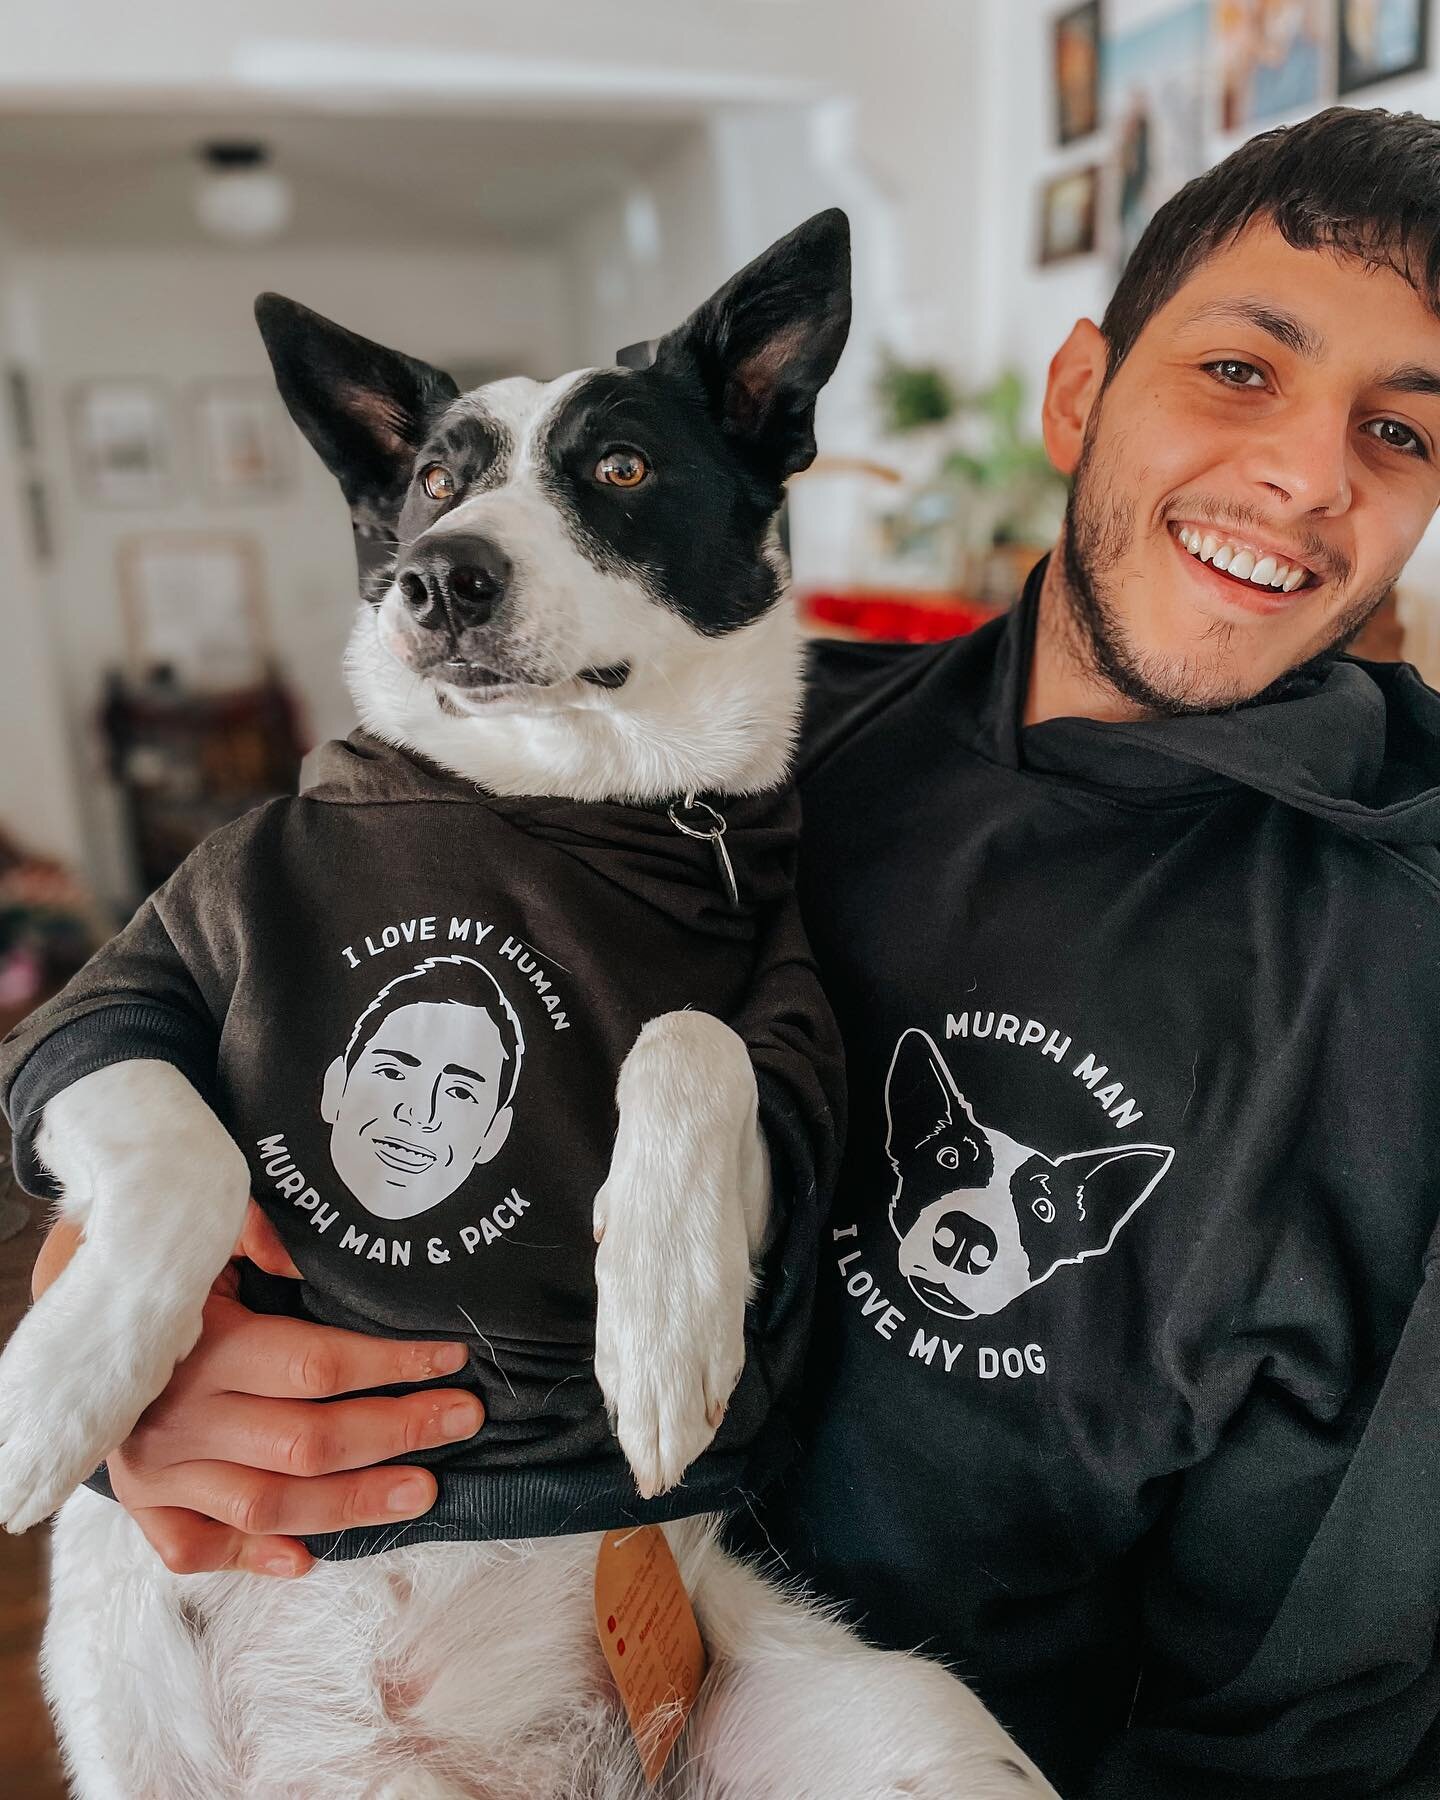 When matching sweaters is simply not enough. Custom illustrations, cut and ironed into some matching sweaters 🤩💕 Best dog dad + good boy combo around.